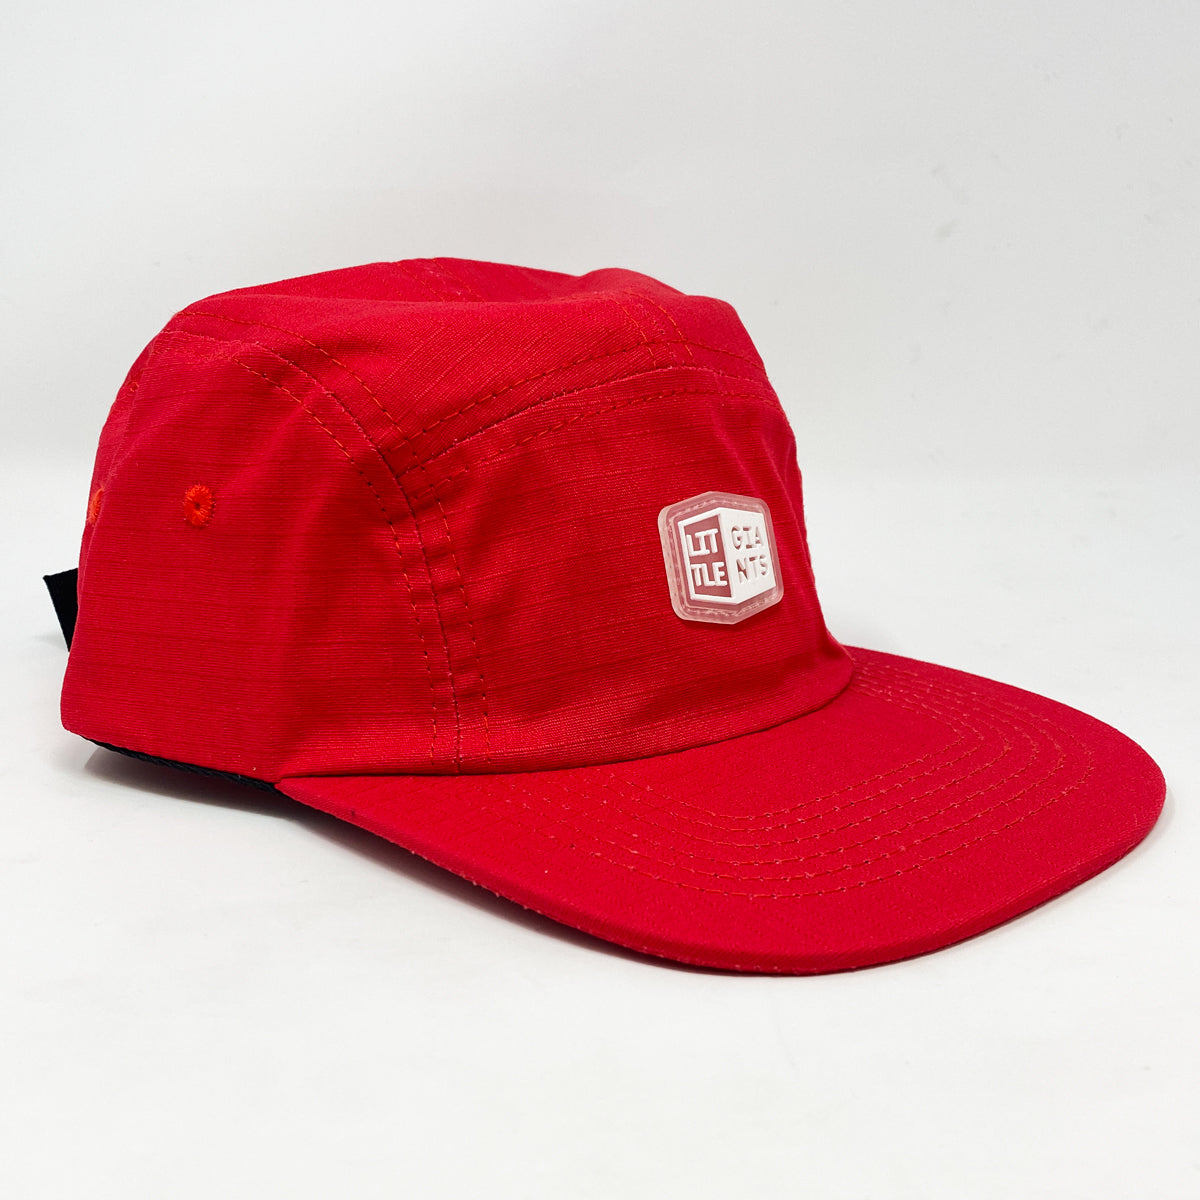 Little Giants 5 Panel Hat (Red)